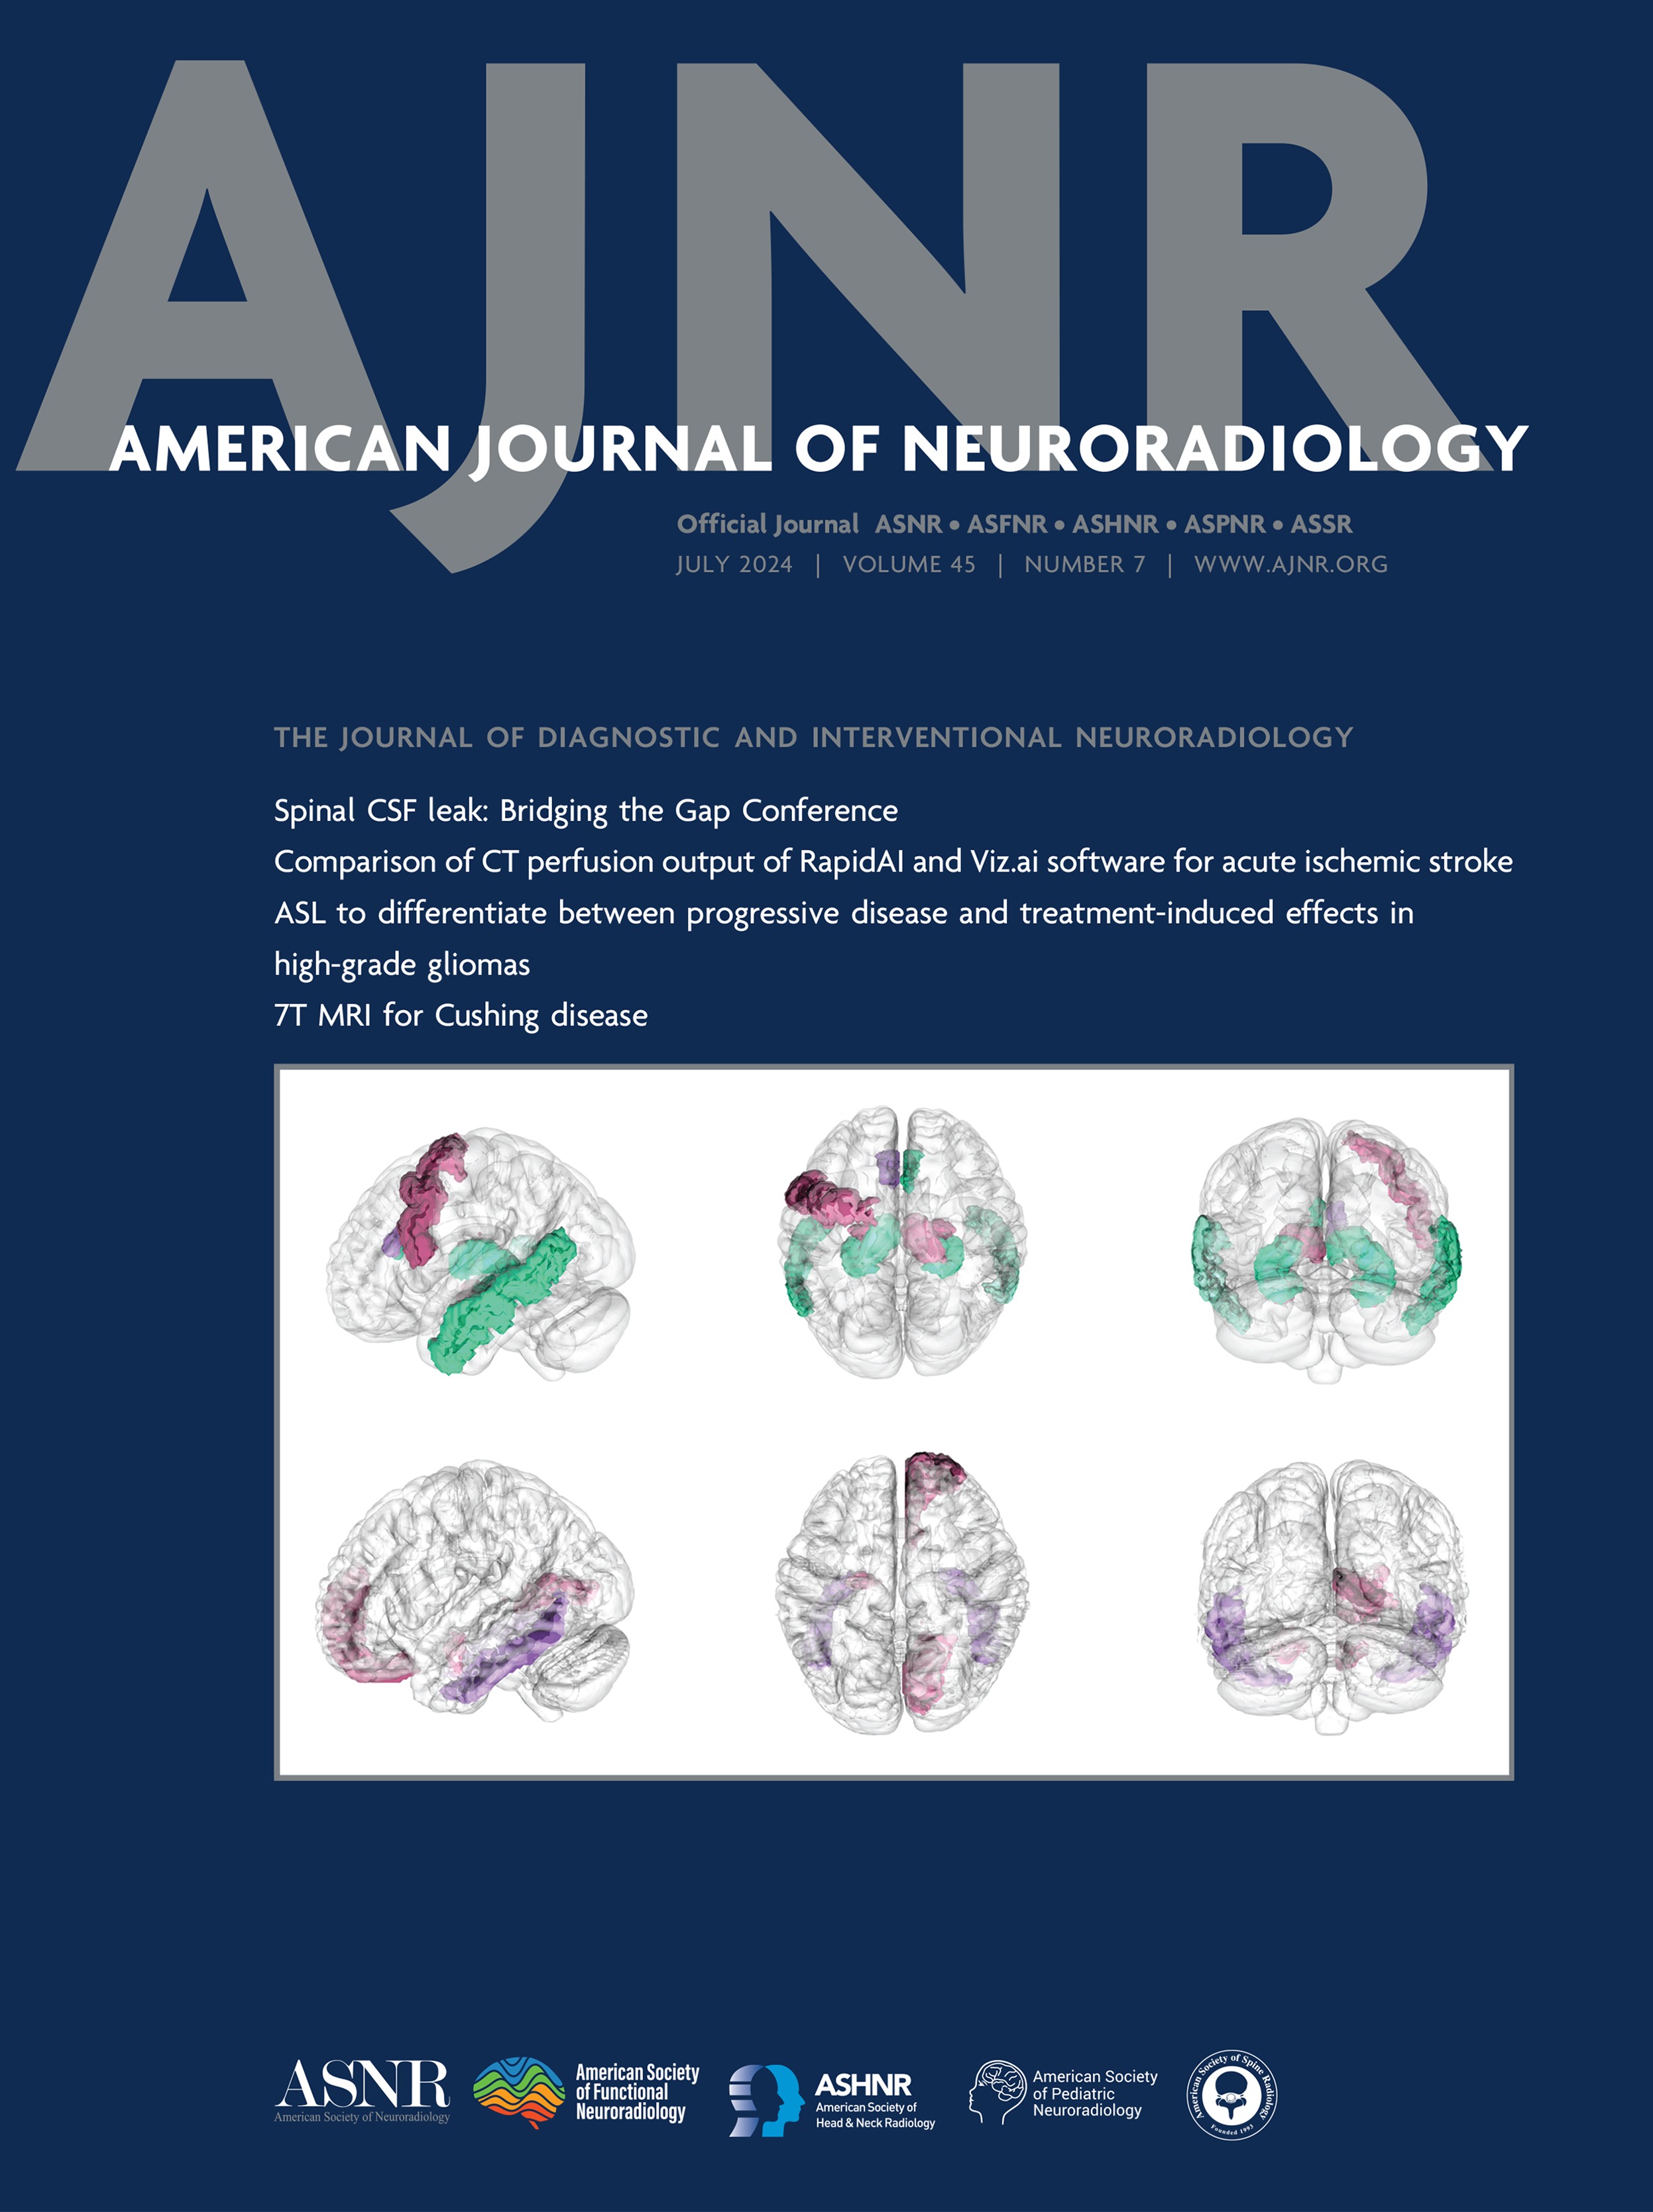 Association between CT Perfusion Parameters and Hemorrhagic Transformation after Endovascular Treatment in Acute Ischemic Stroke: Results from the ESCAPE-NA1 Trial [NEUROVASCULAR/STROKE IMAGING]